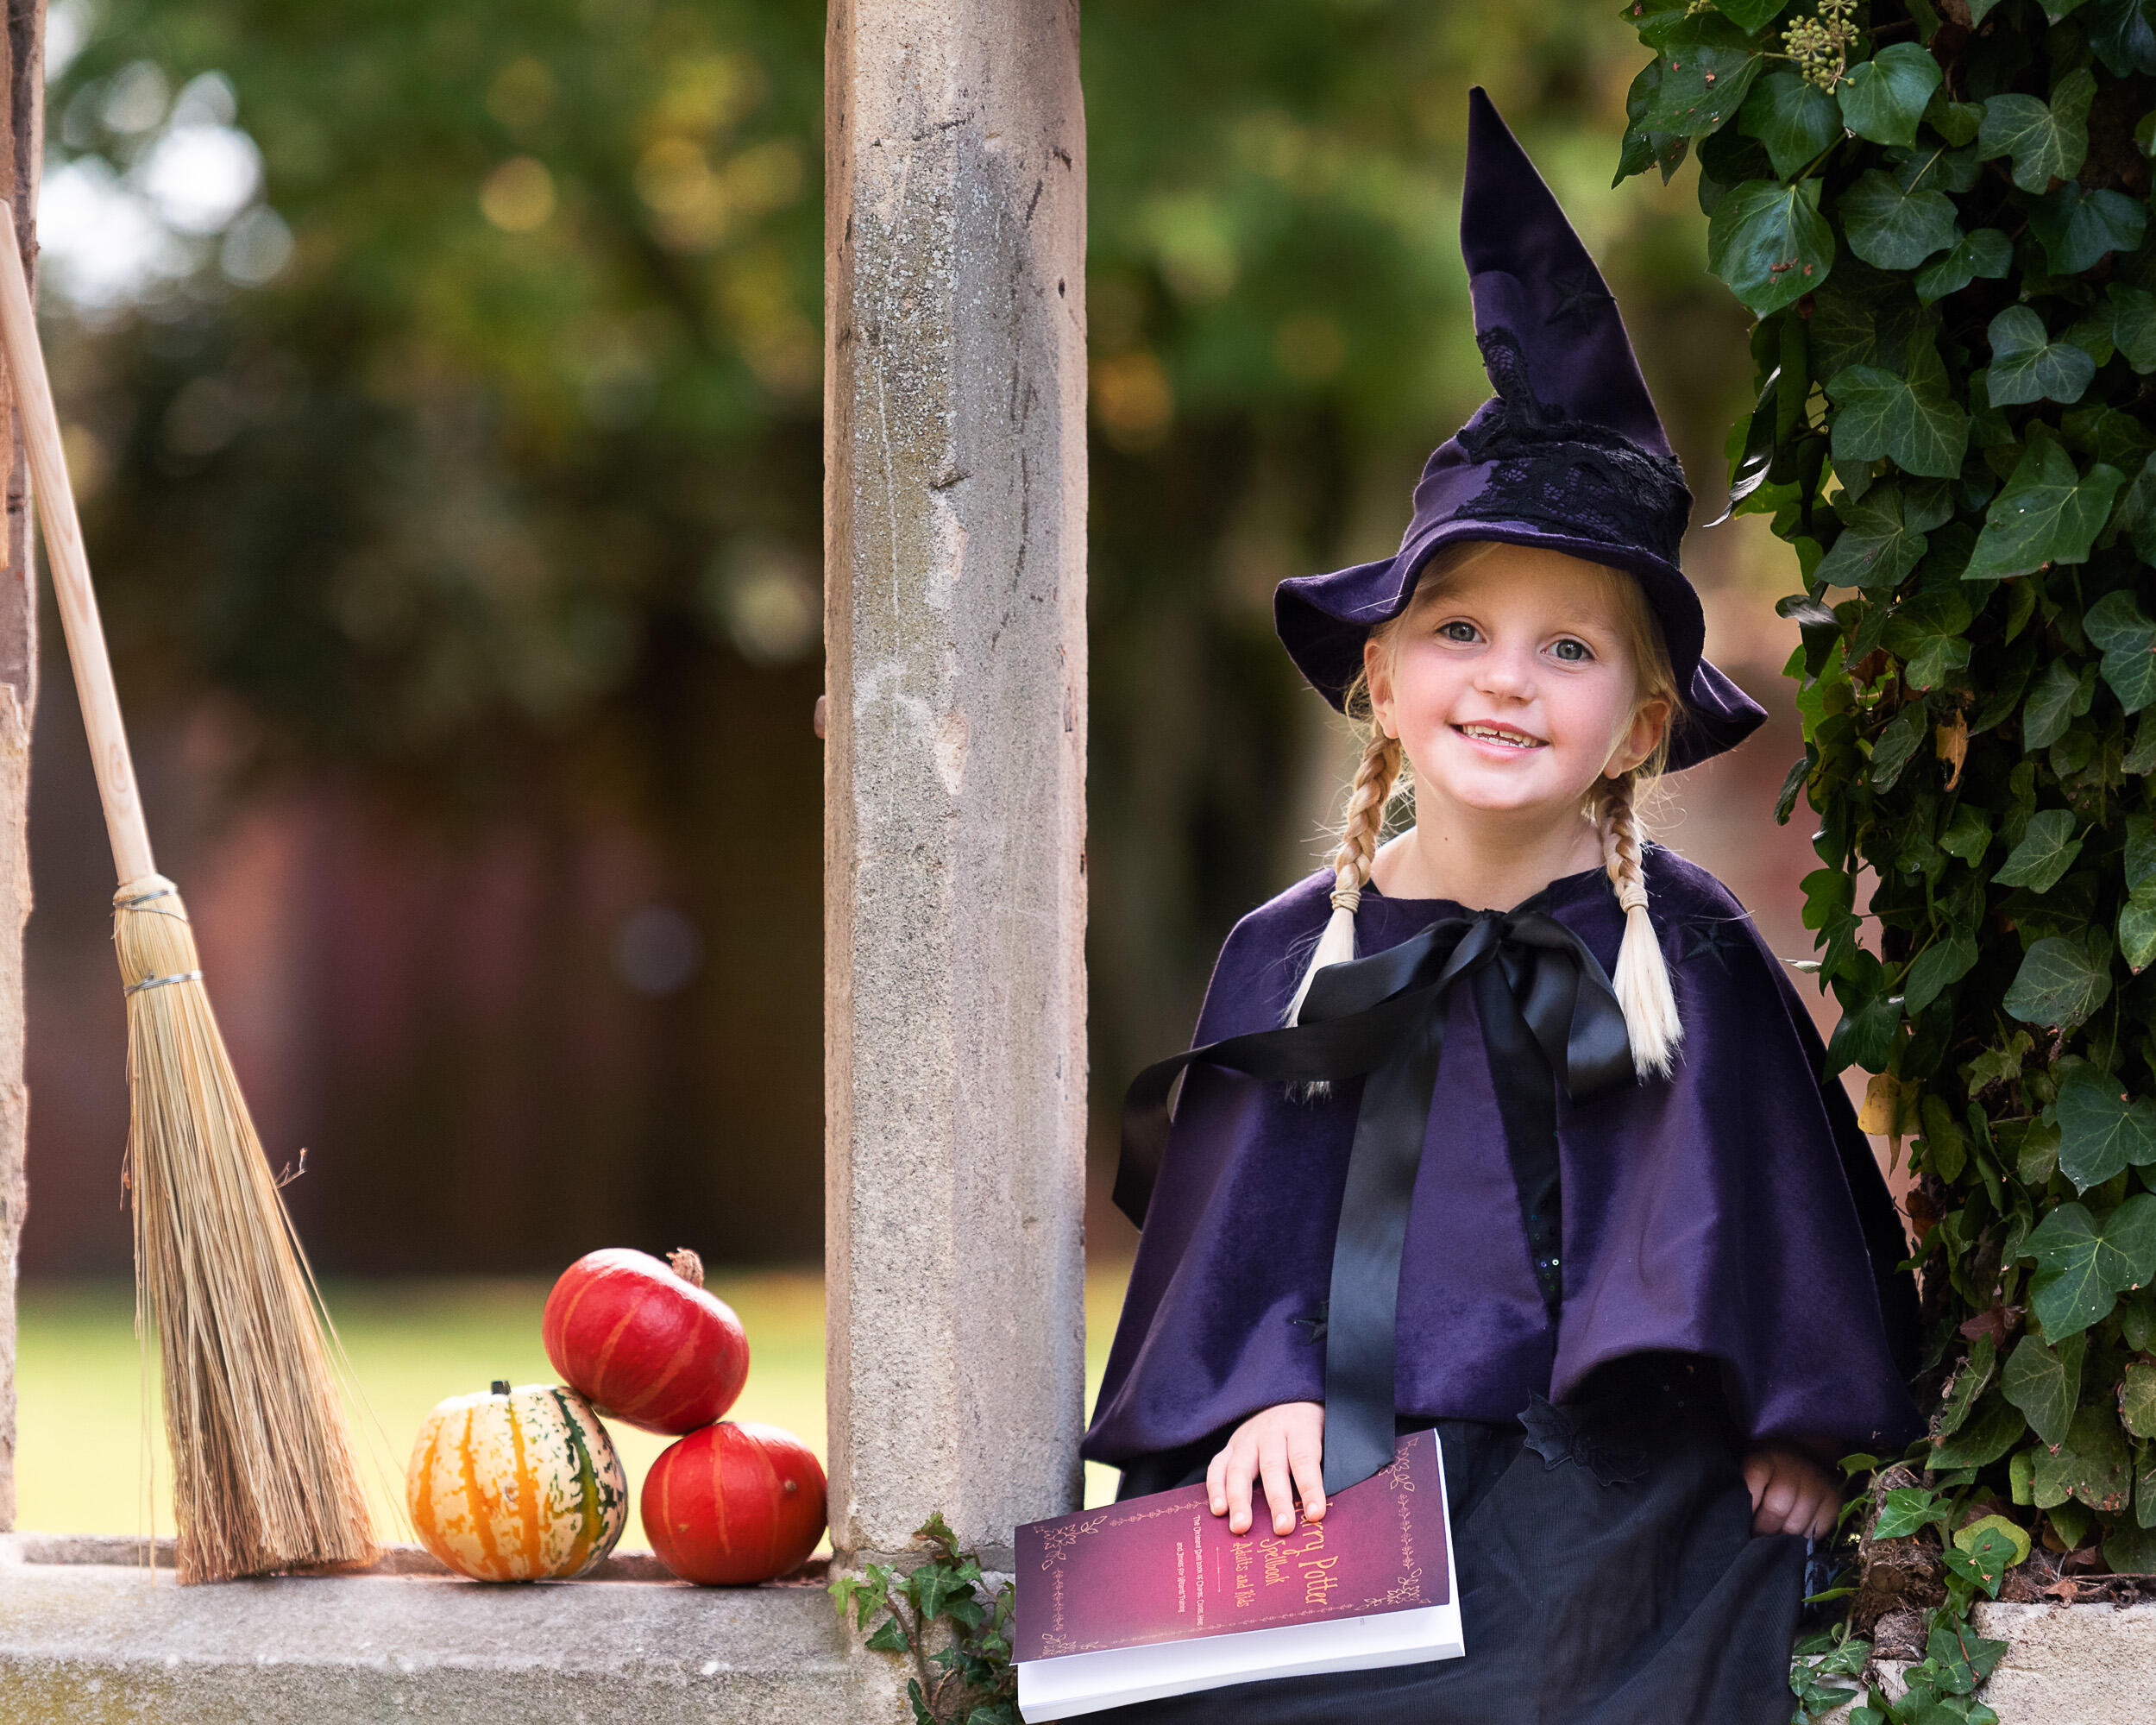 Little witch child costume with cape and hat for Halloween